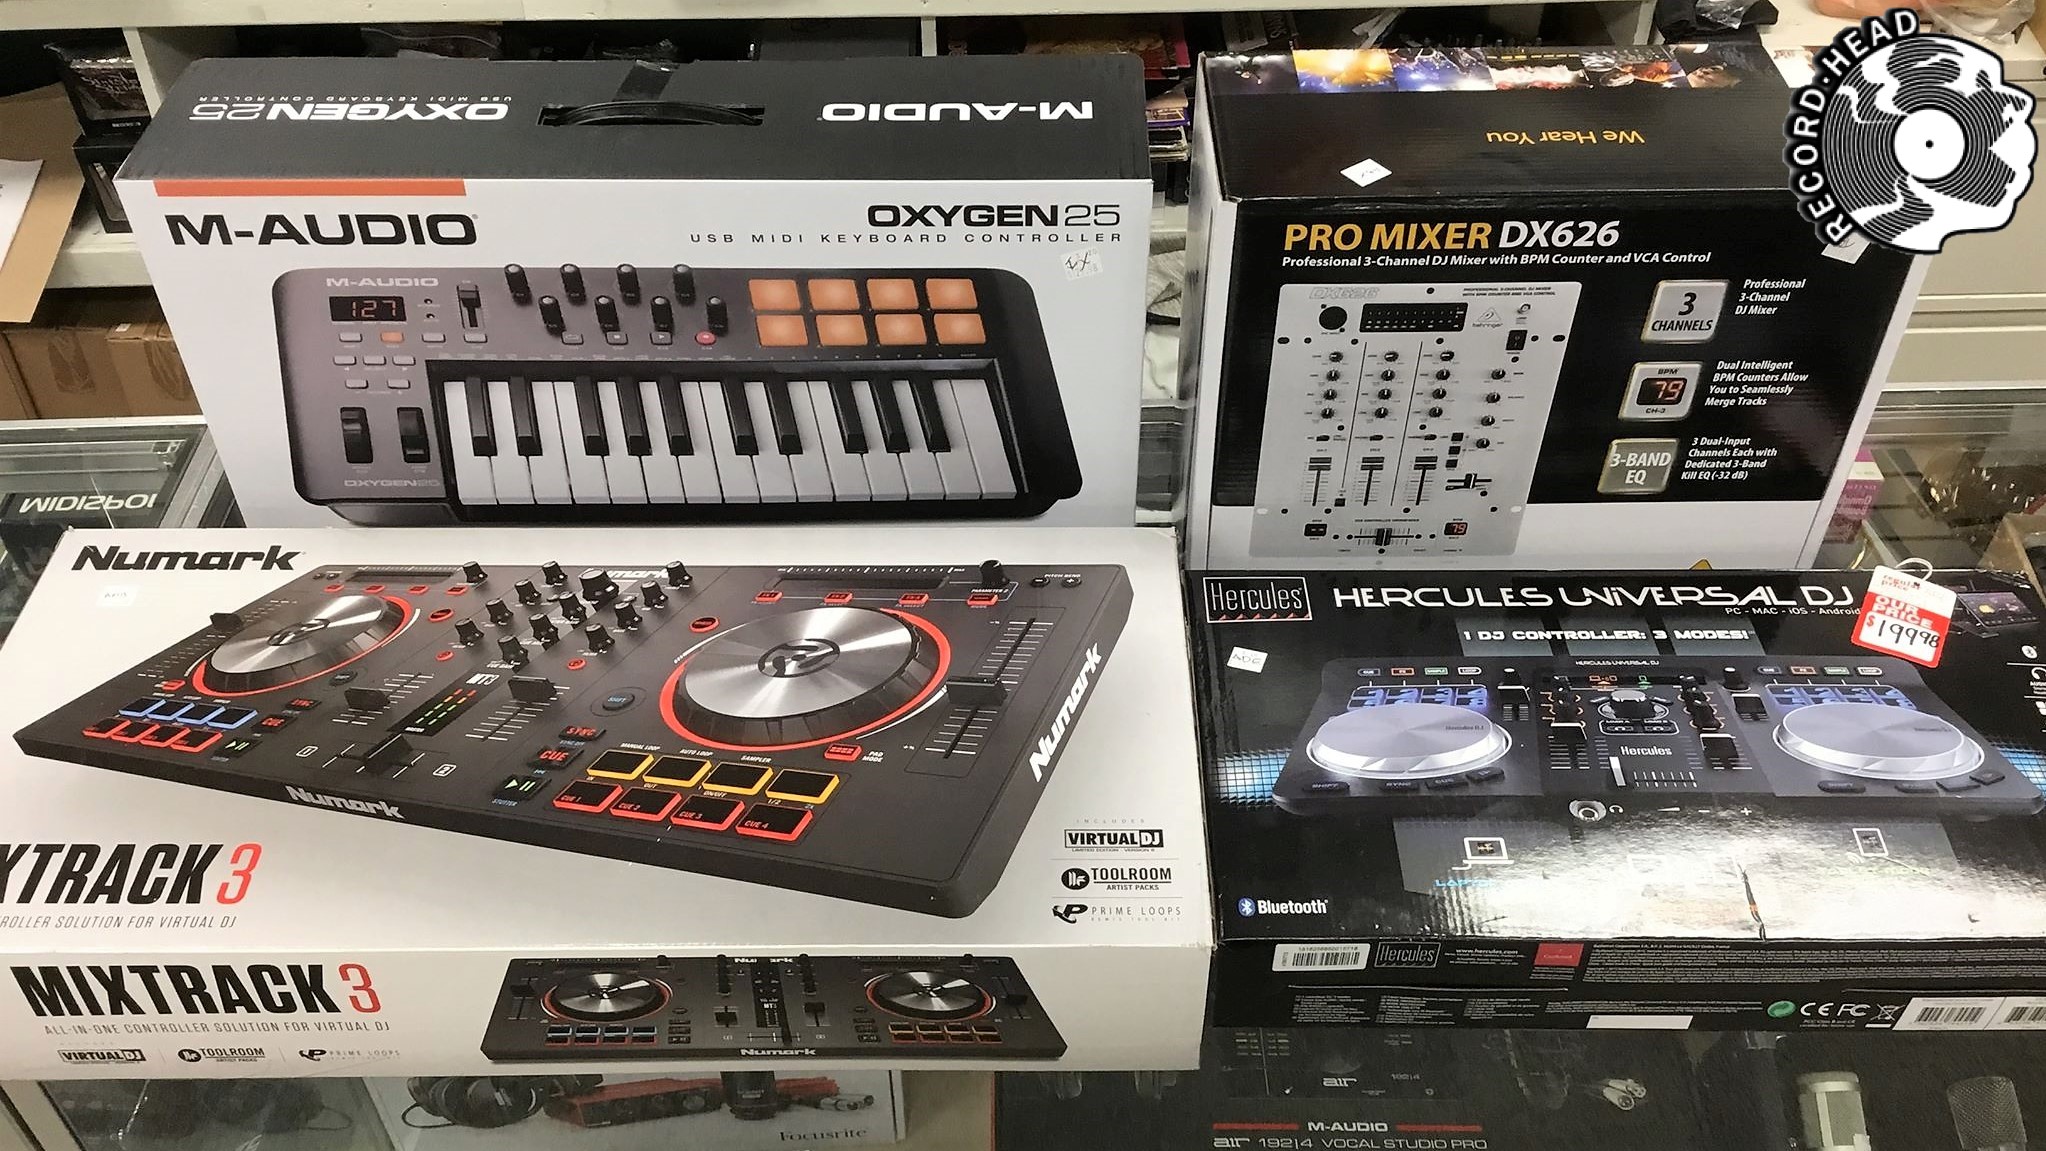 Oxygen 25 USB mini keyboard controller and Pro Mixer DX6 Professional 3-channel DJ Mixer. Studio equipment for sale, still in boxes.